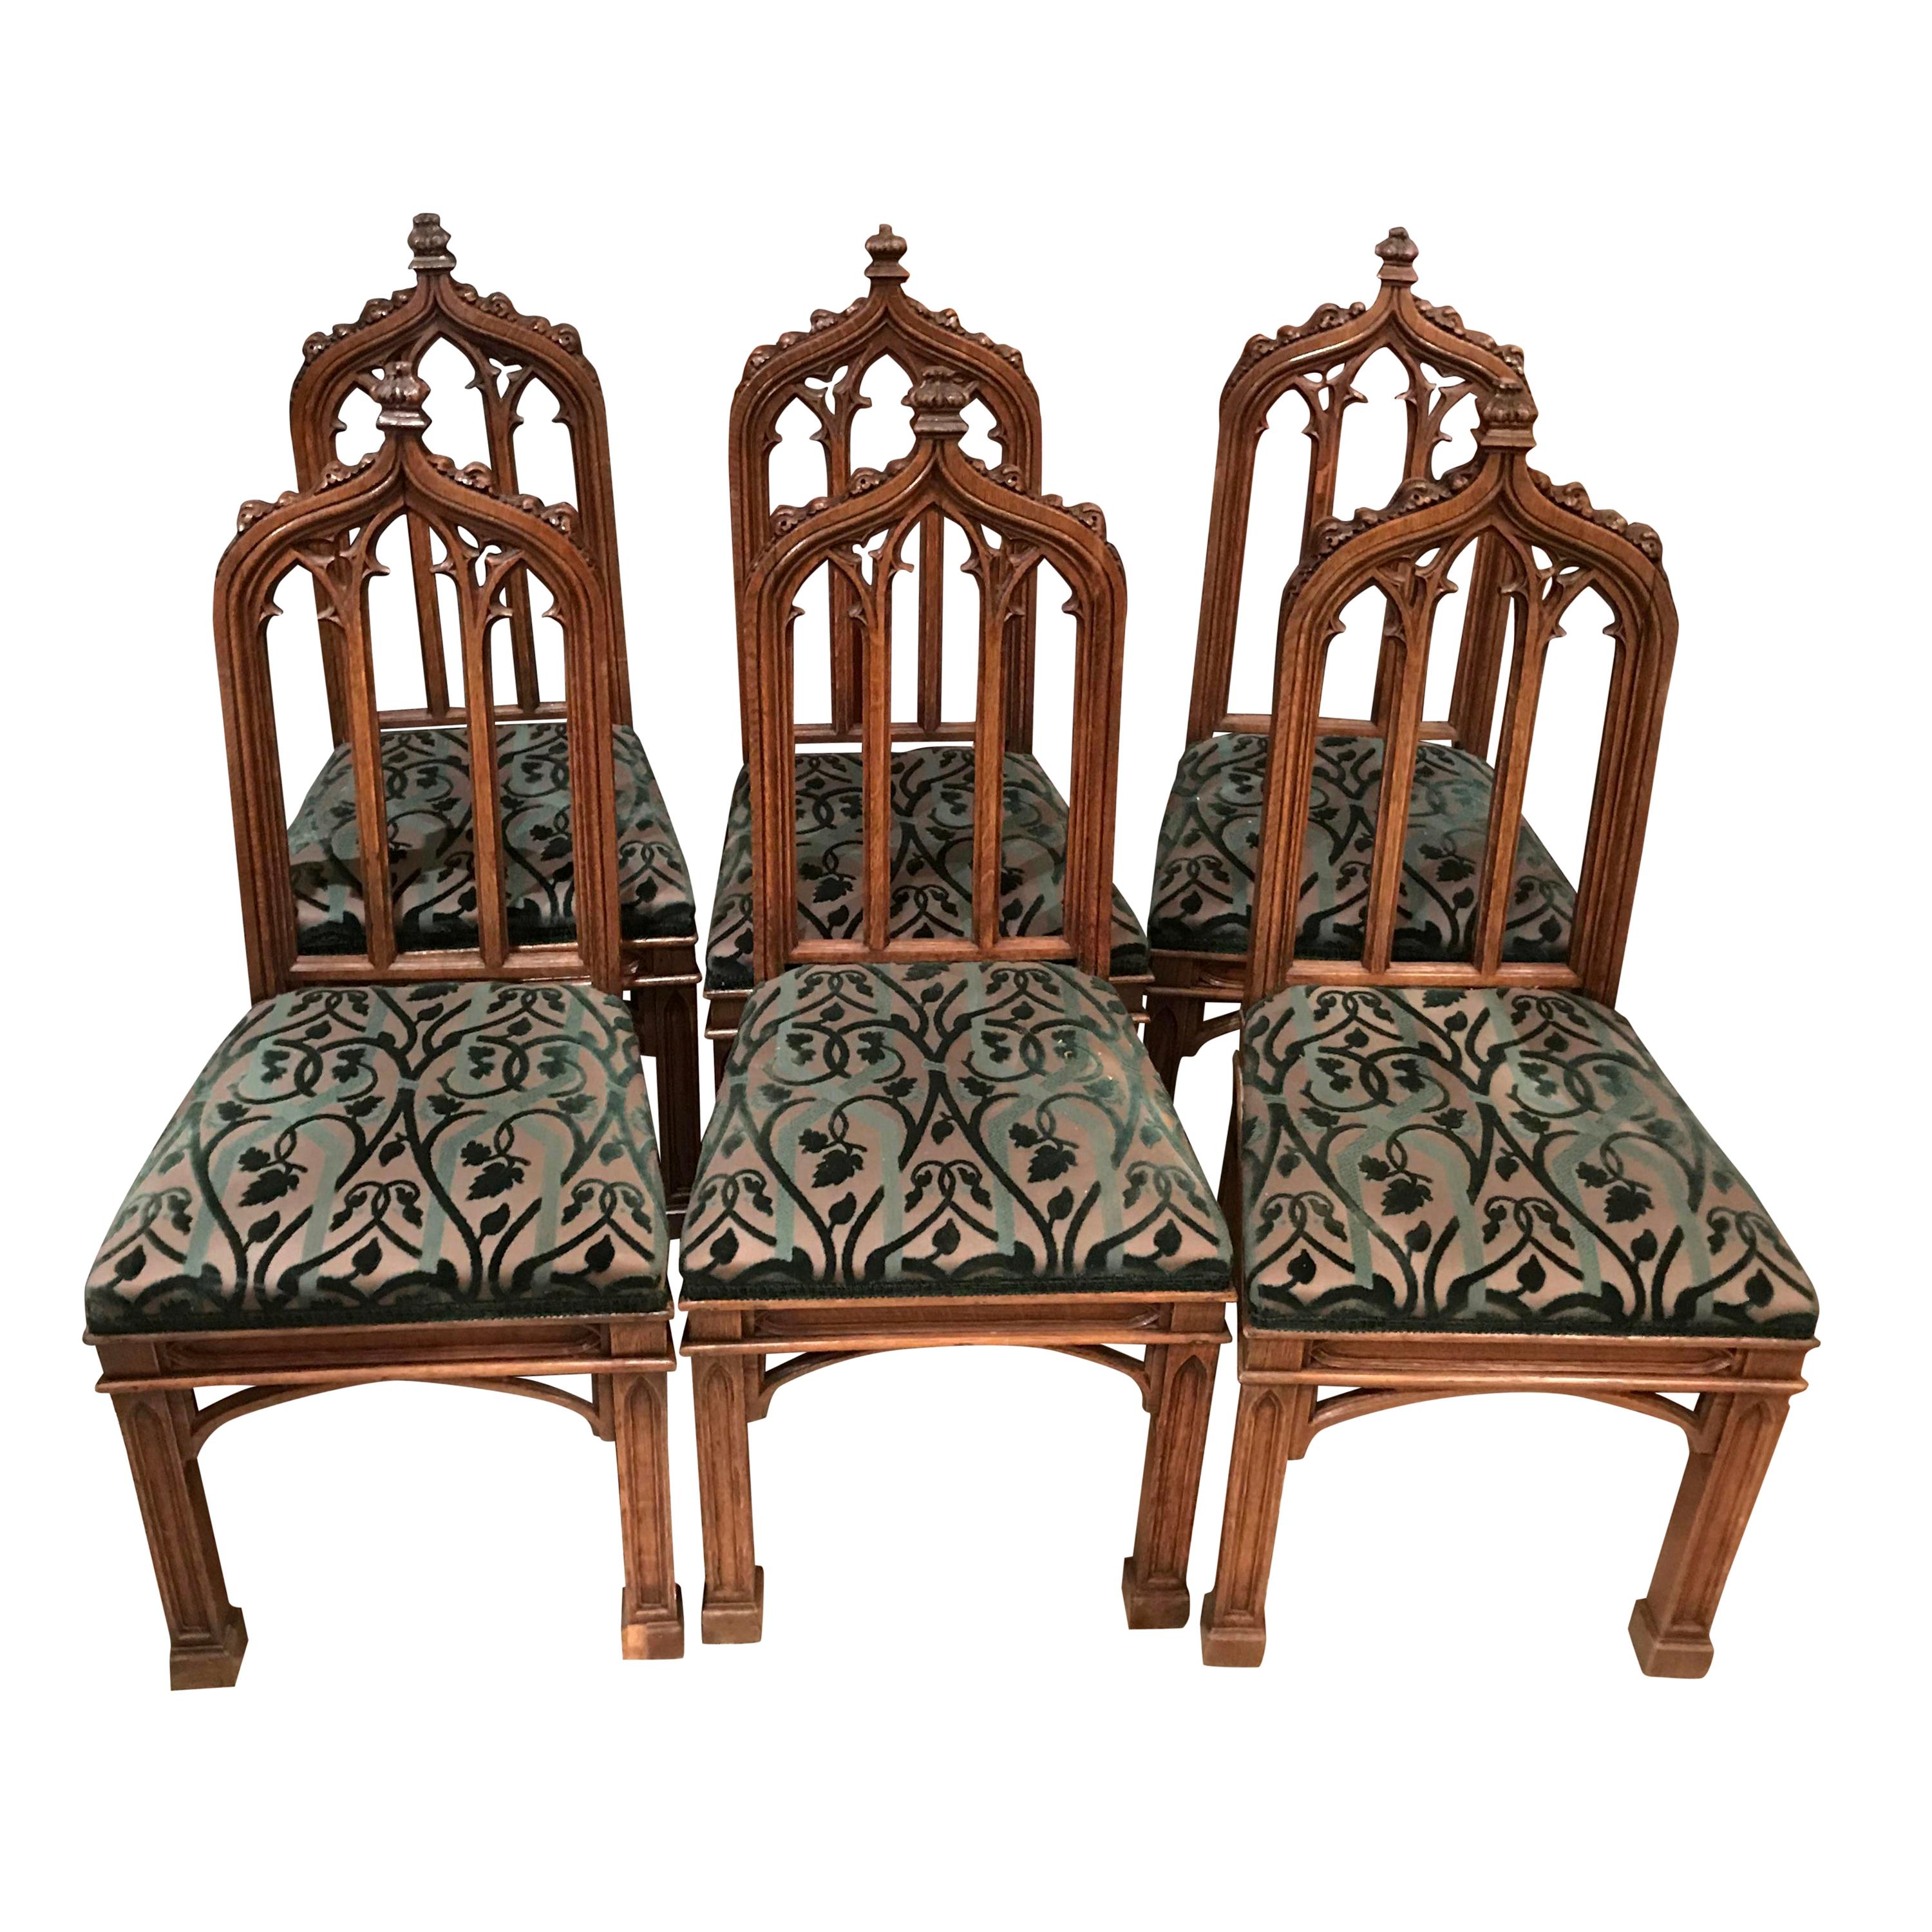 Early 19th Century Vintage Gothic Revival Dining Chairs, Set of 6